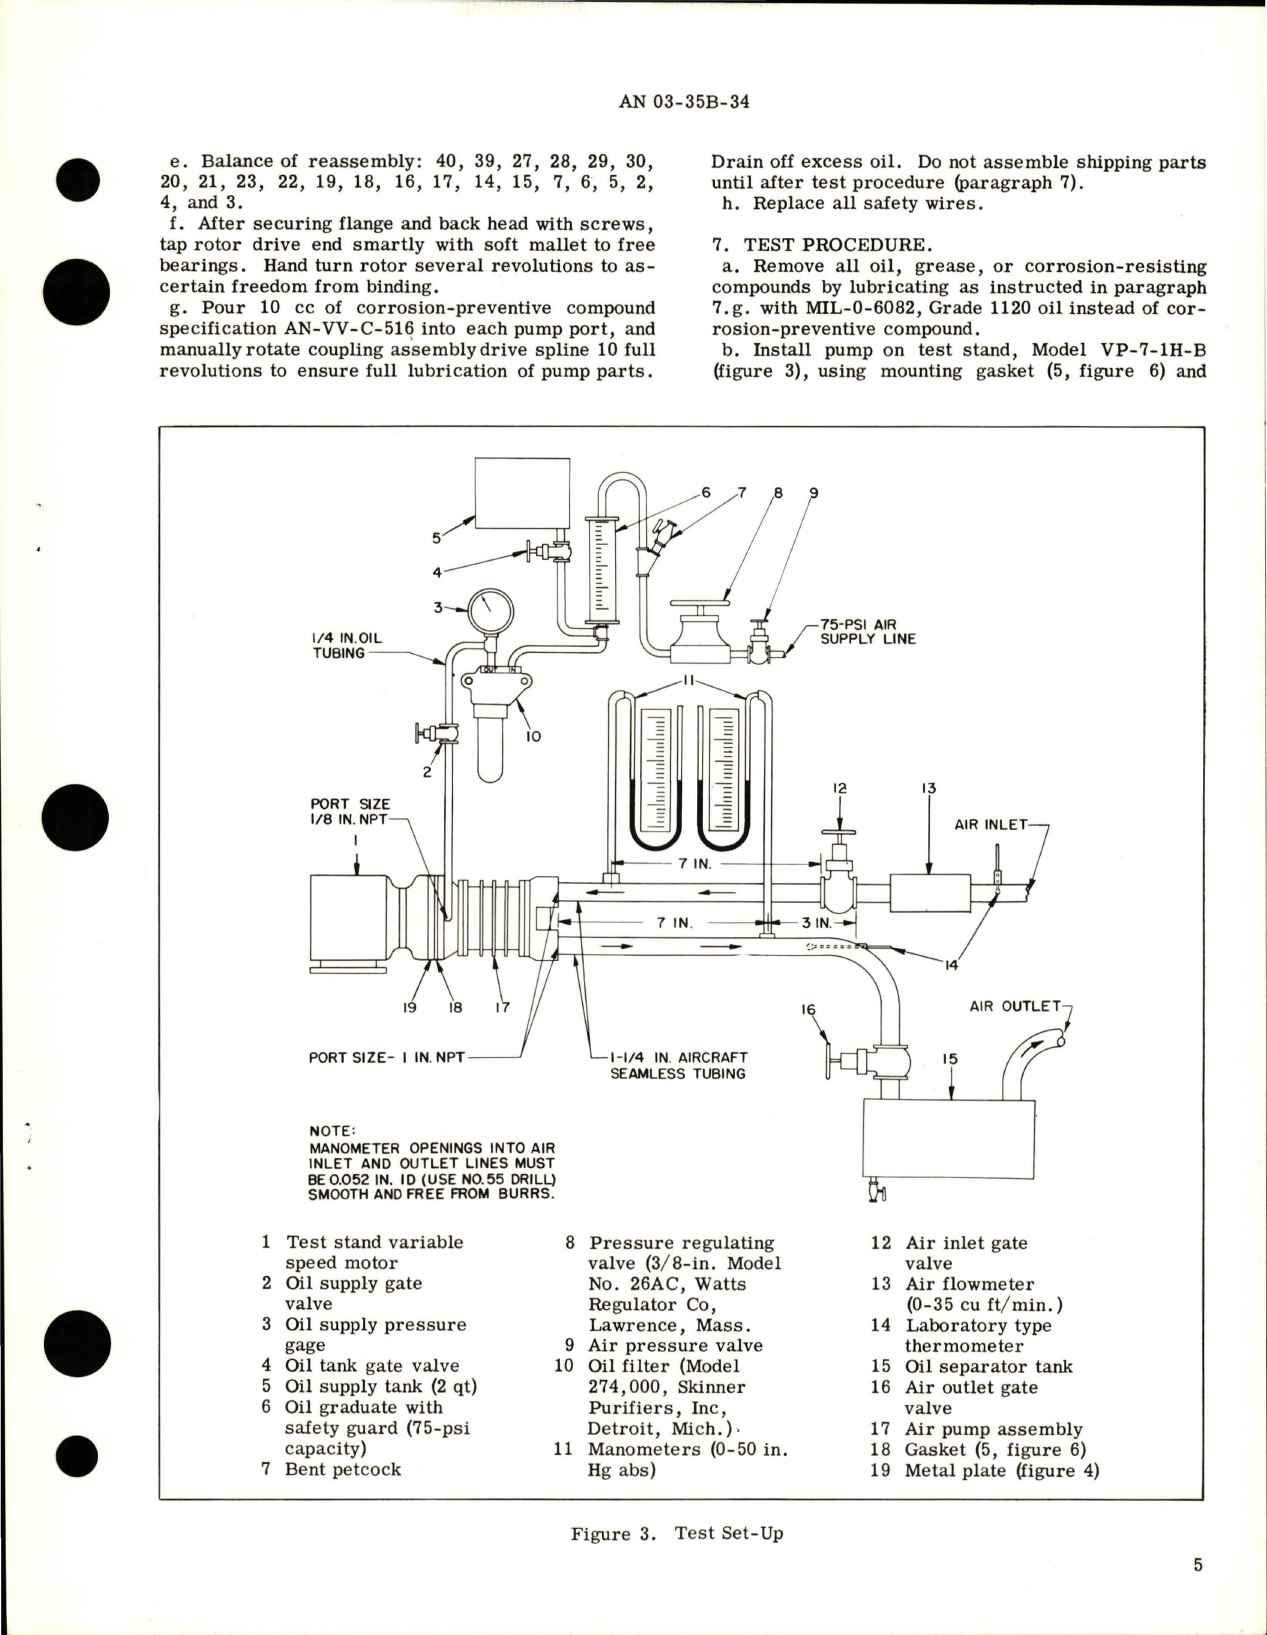 Sample page 5 from AirCorps Library document: Overhaul Instructions with Parts Breakdown for Air Pump Assembly - Parts 33E02-1-A and 33E02-2-A 